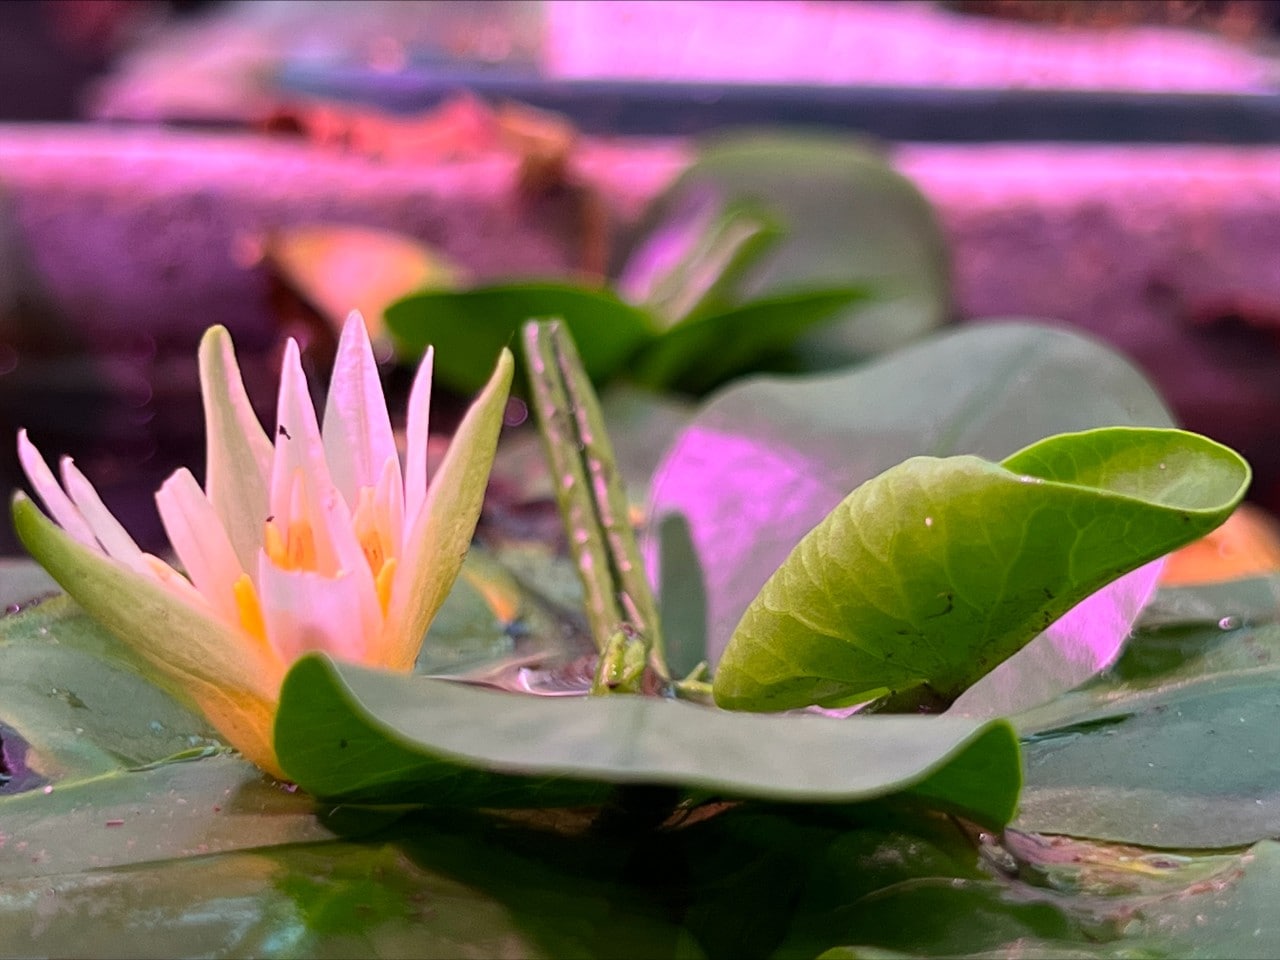 World’s smallest waterlily Nymphaea thermarum has never been reintroduced [credit: John Ewen]